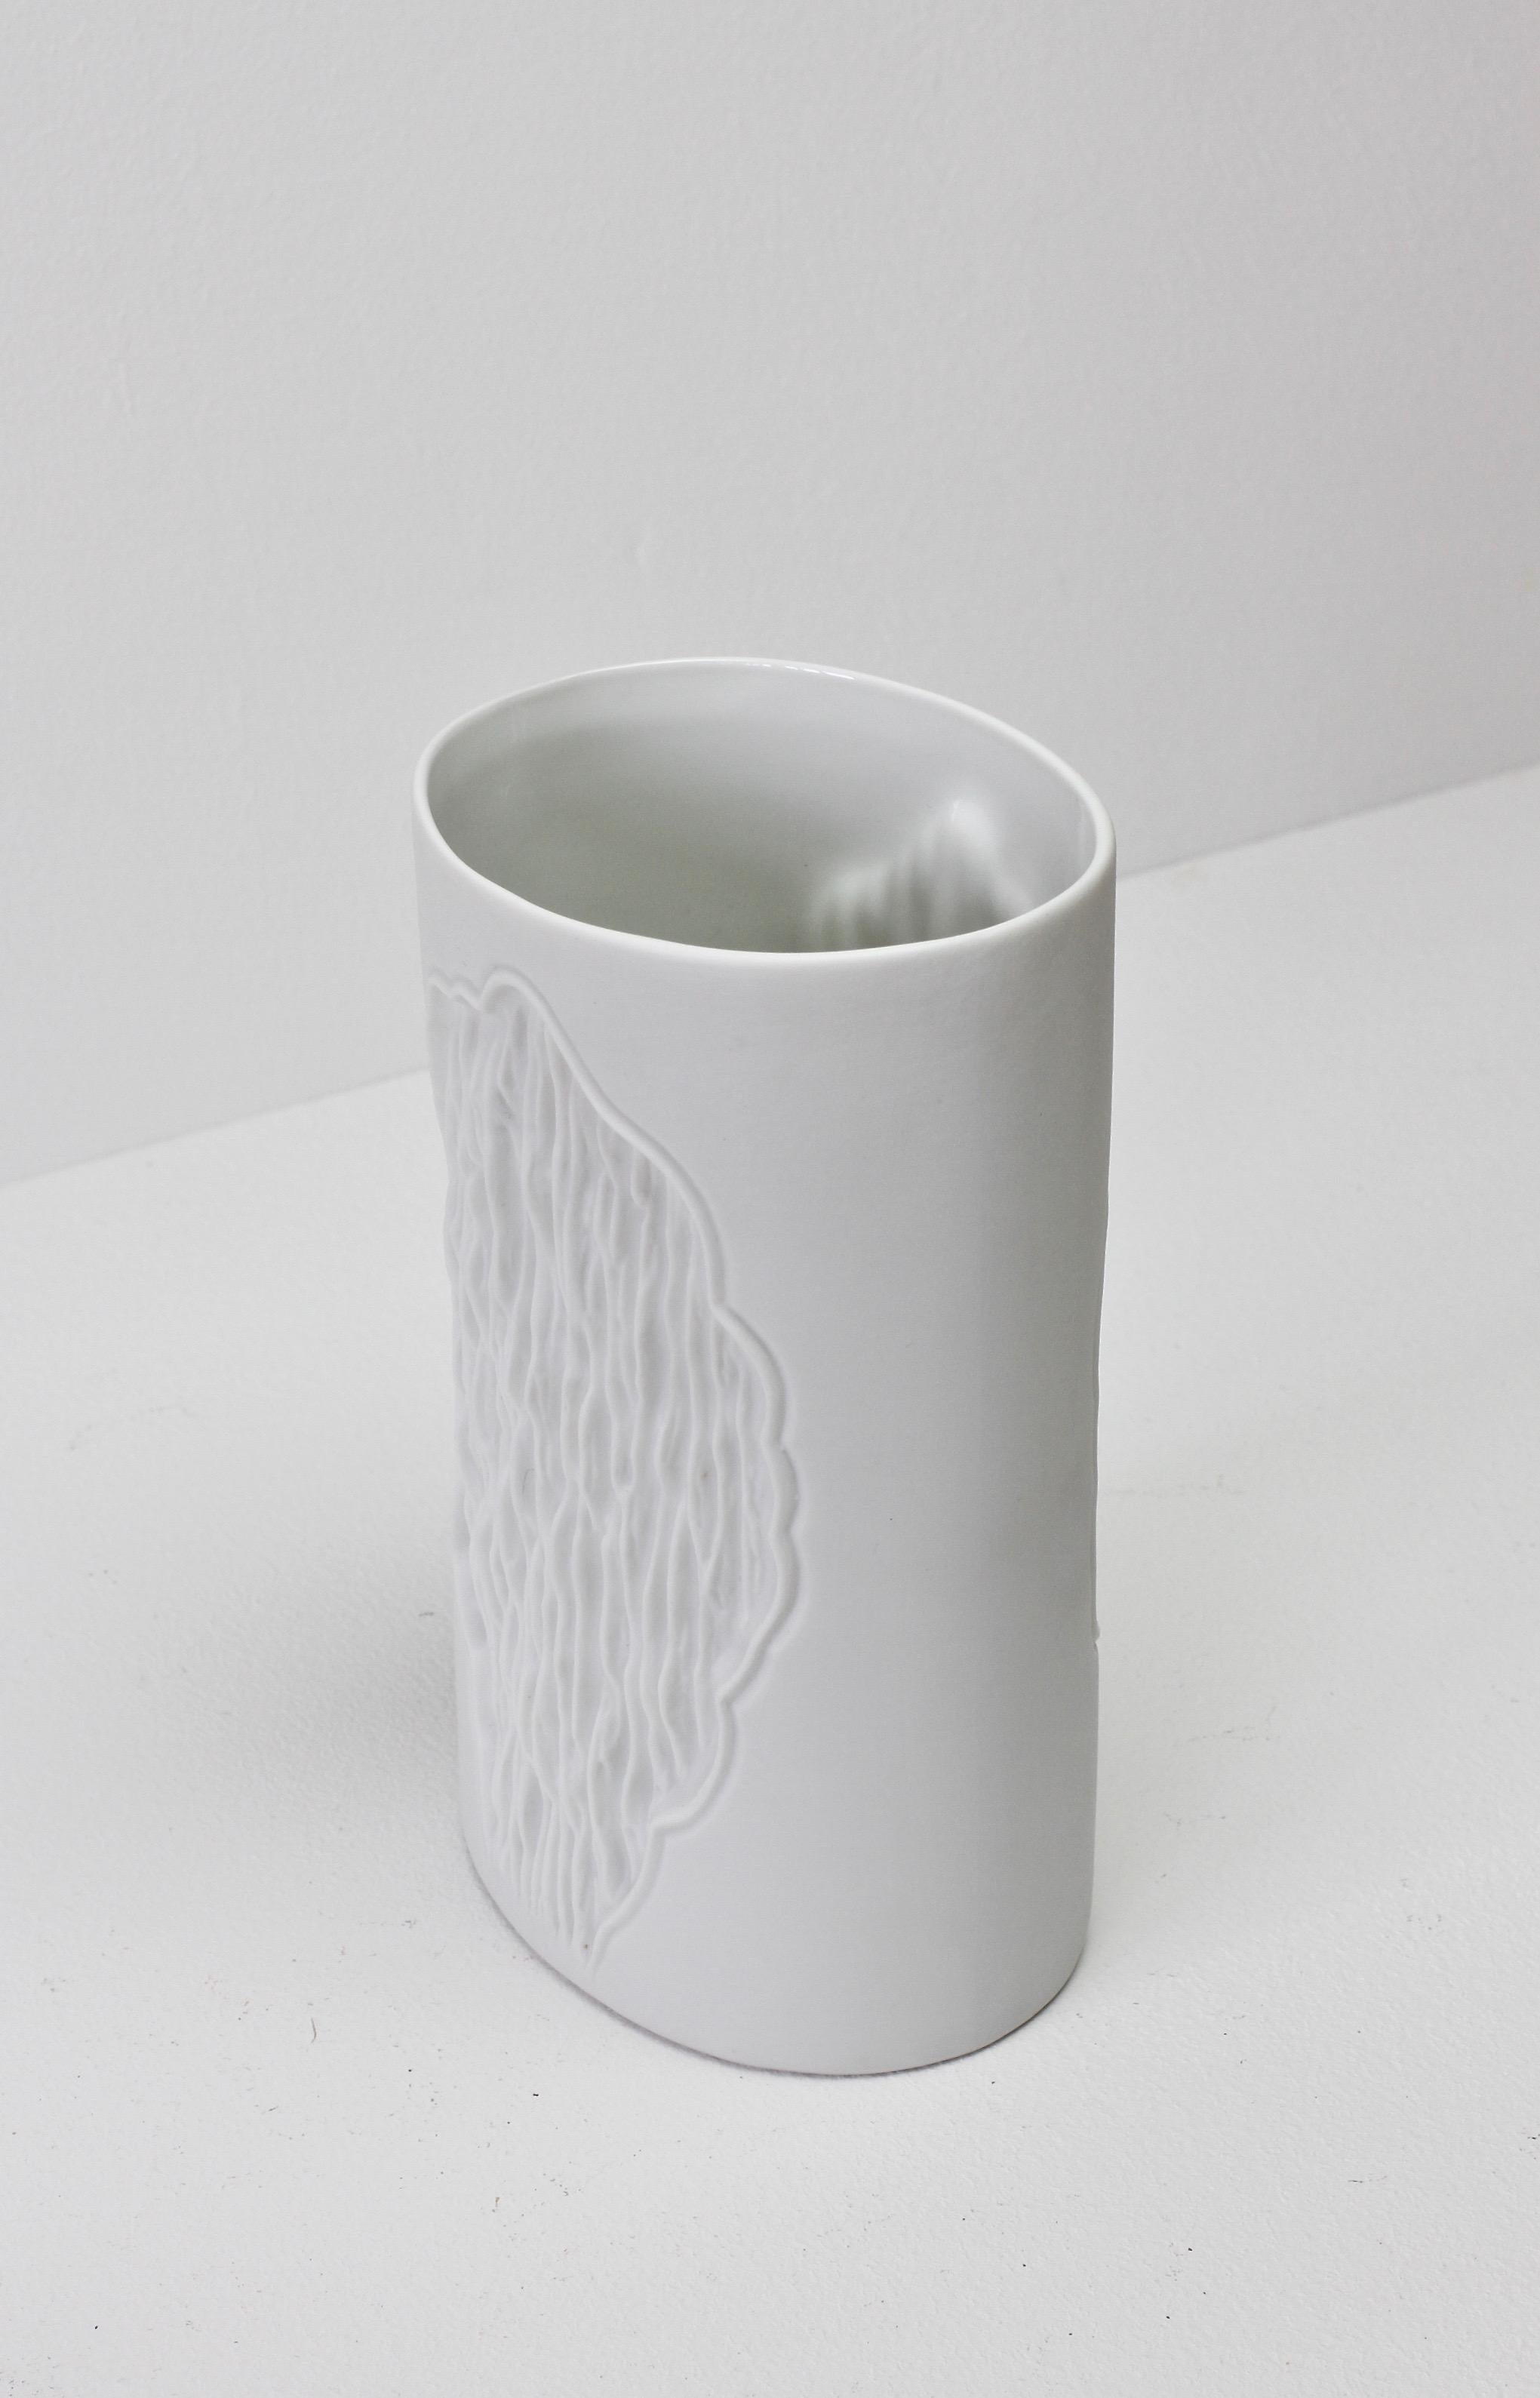 A vintage white bisque vase featuring an organic textured 'exposed rock' relief pattern designed by Manfred Frey for AK Kaiser Porcelain, circa 1980s.

Model/shape number 0648.